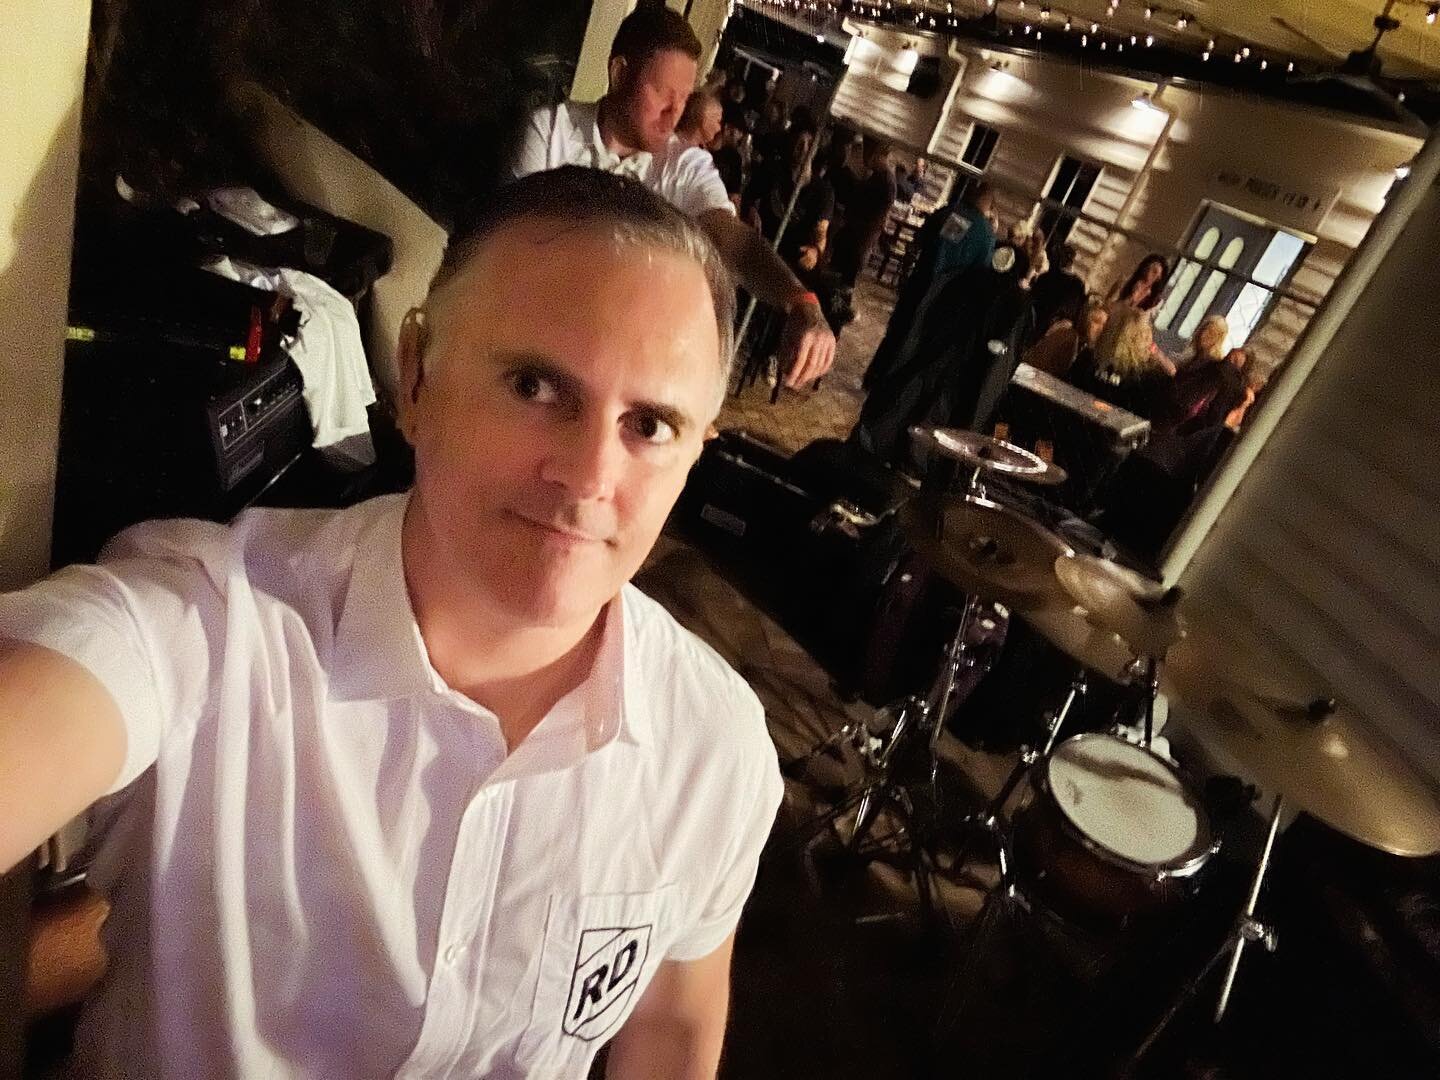 Backstage with all gear set up ready to go right after #cog at #wallapalooza2023 totally forgot to post this when it happened. Gig went great, gained some new fans. #gig #drums #drumming #drummer #rickdangerousandthesilkiebantams